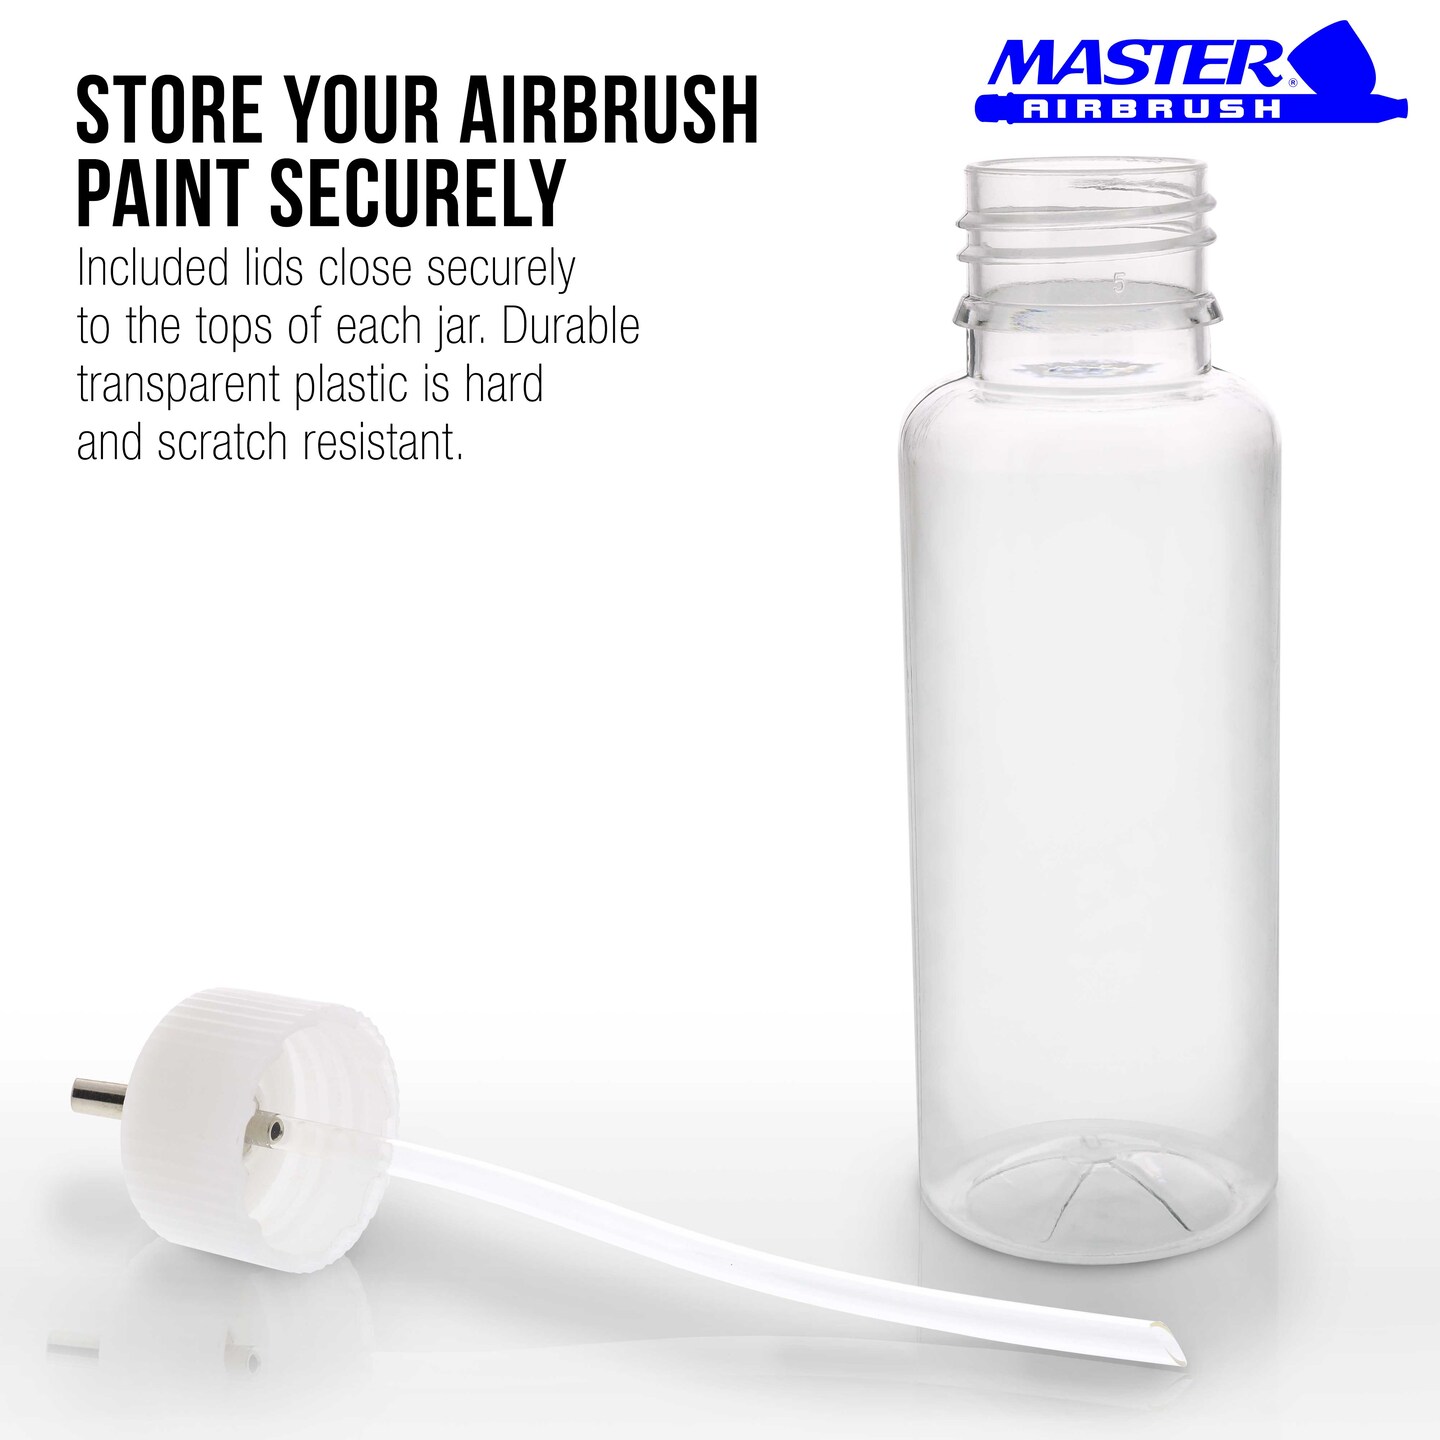 10 Pack Master Airbrush TB-009, 3.4oz Plastic Jar Bottles with 30 Degrees Down Angle Adaptor Lid Assembly, Dual-Action Siphon